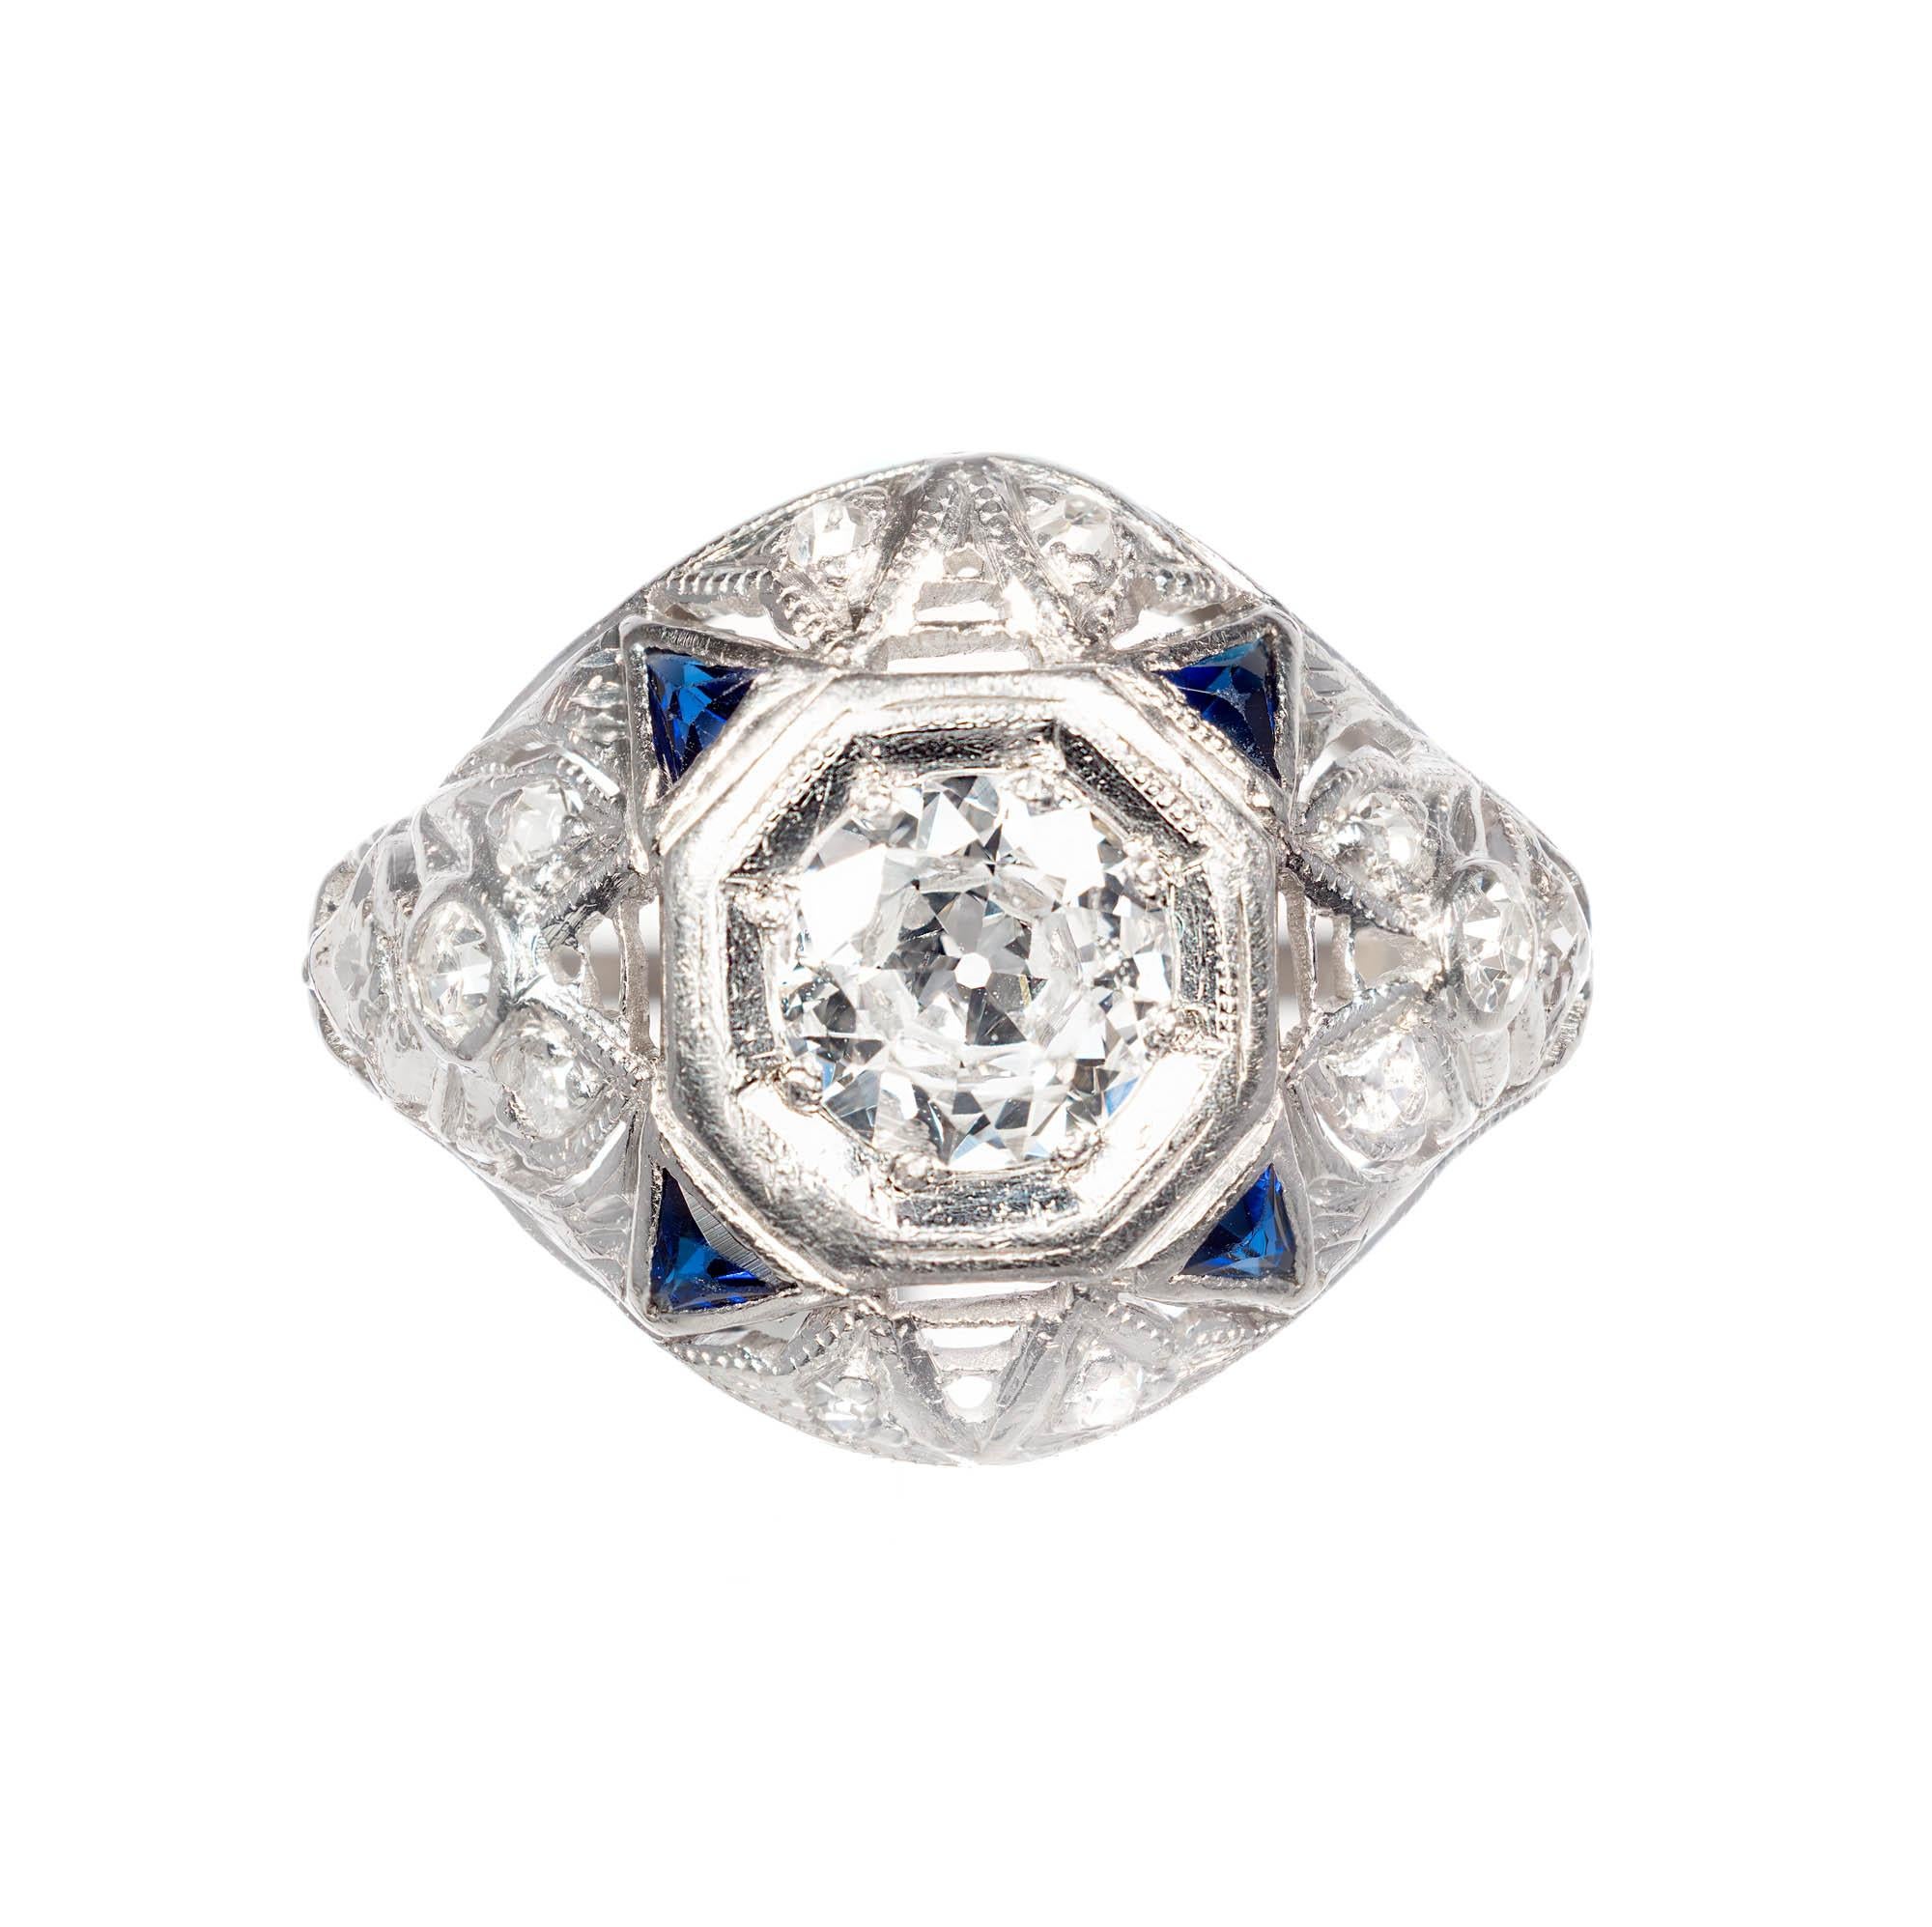 .49ct Diamond Sapphire Platinum Art Deco engagement ring. Diamond Platinum Art Deco design ring. Center Diamond is bezel set with smaller Diamonds and triangular cut Sapphires accenting around the center and down the shank.

1 round transitional cut